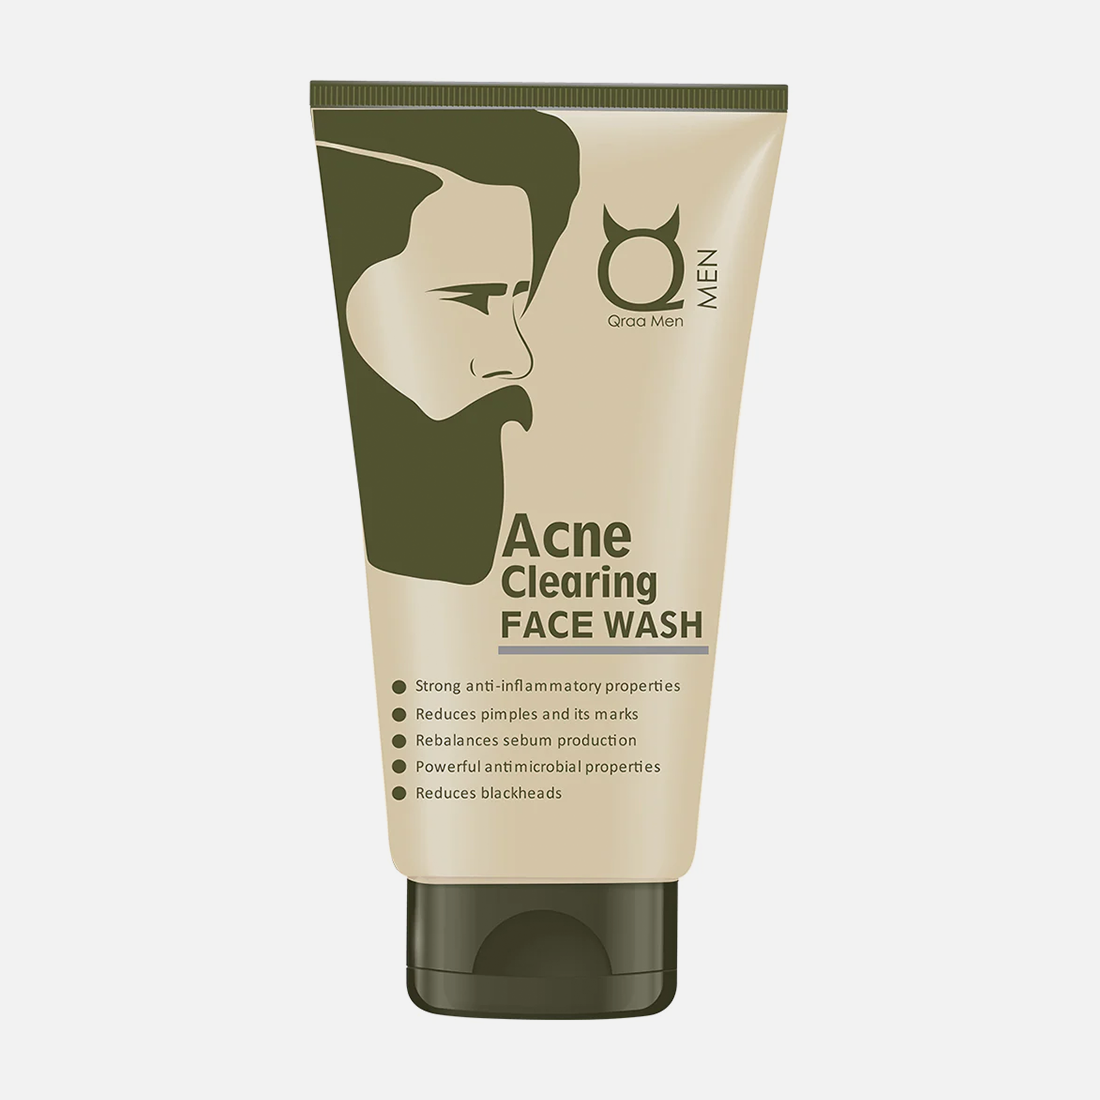 Acne Clearing Face Wash - For Acne and pimples, 100g